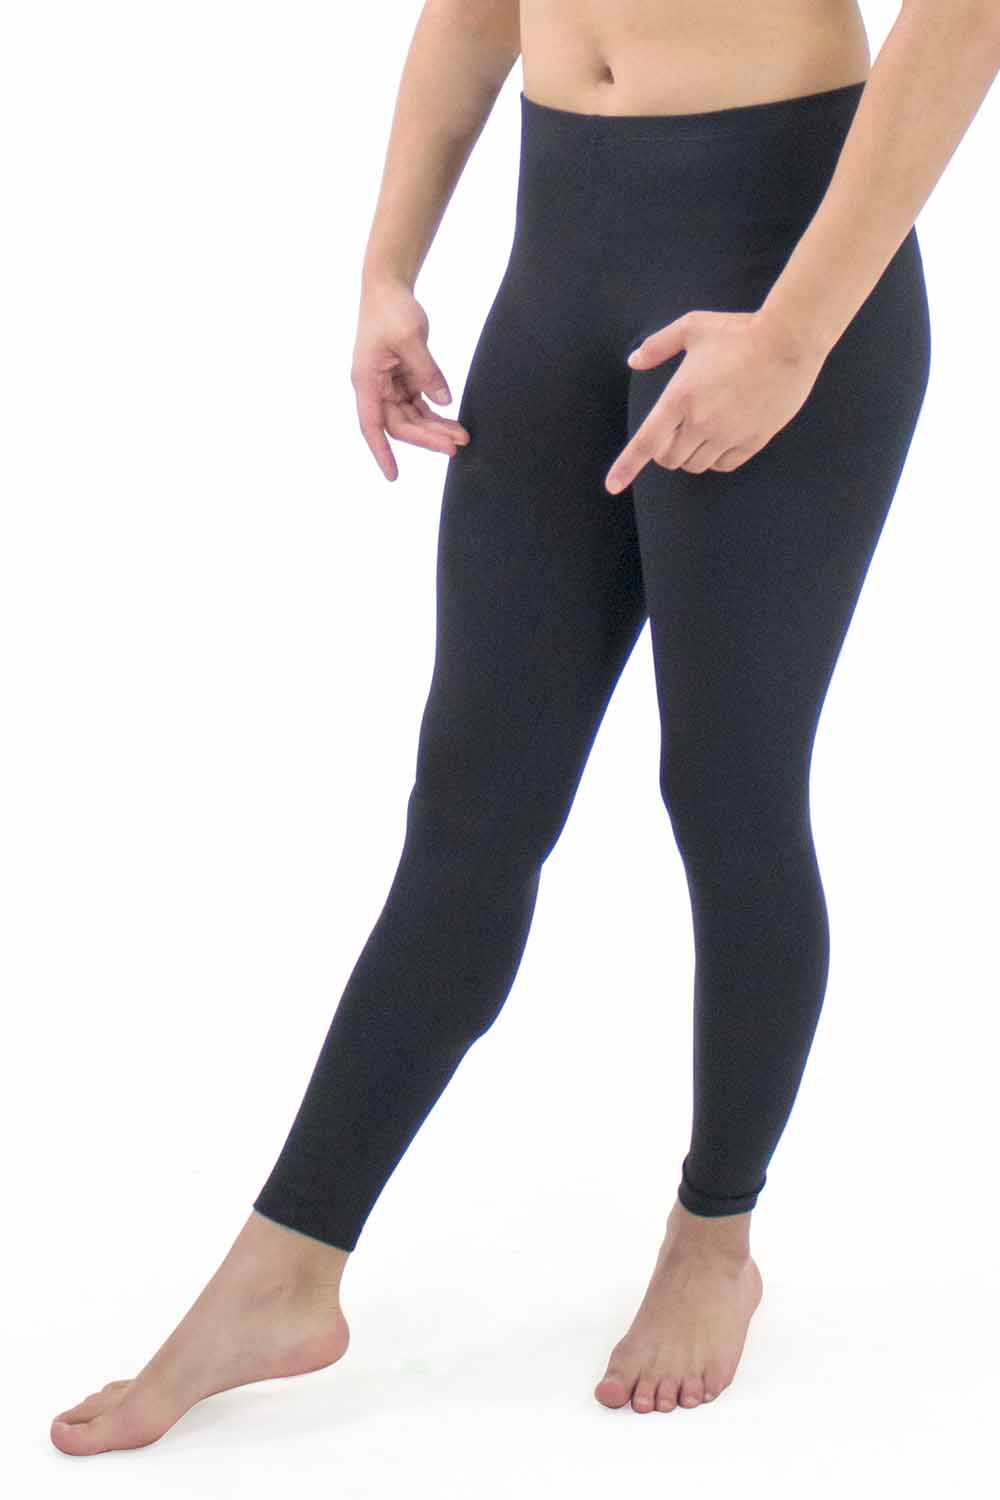 Exceptionally Stylish Wholesale Women Leggings Tights at Low Prices 